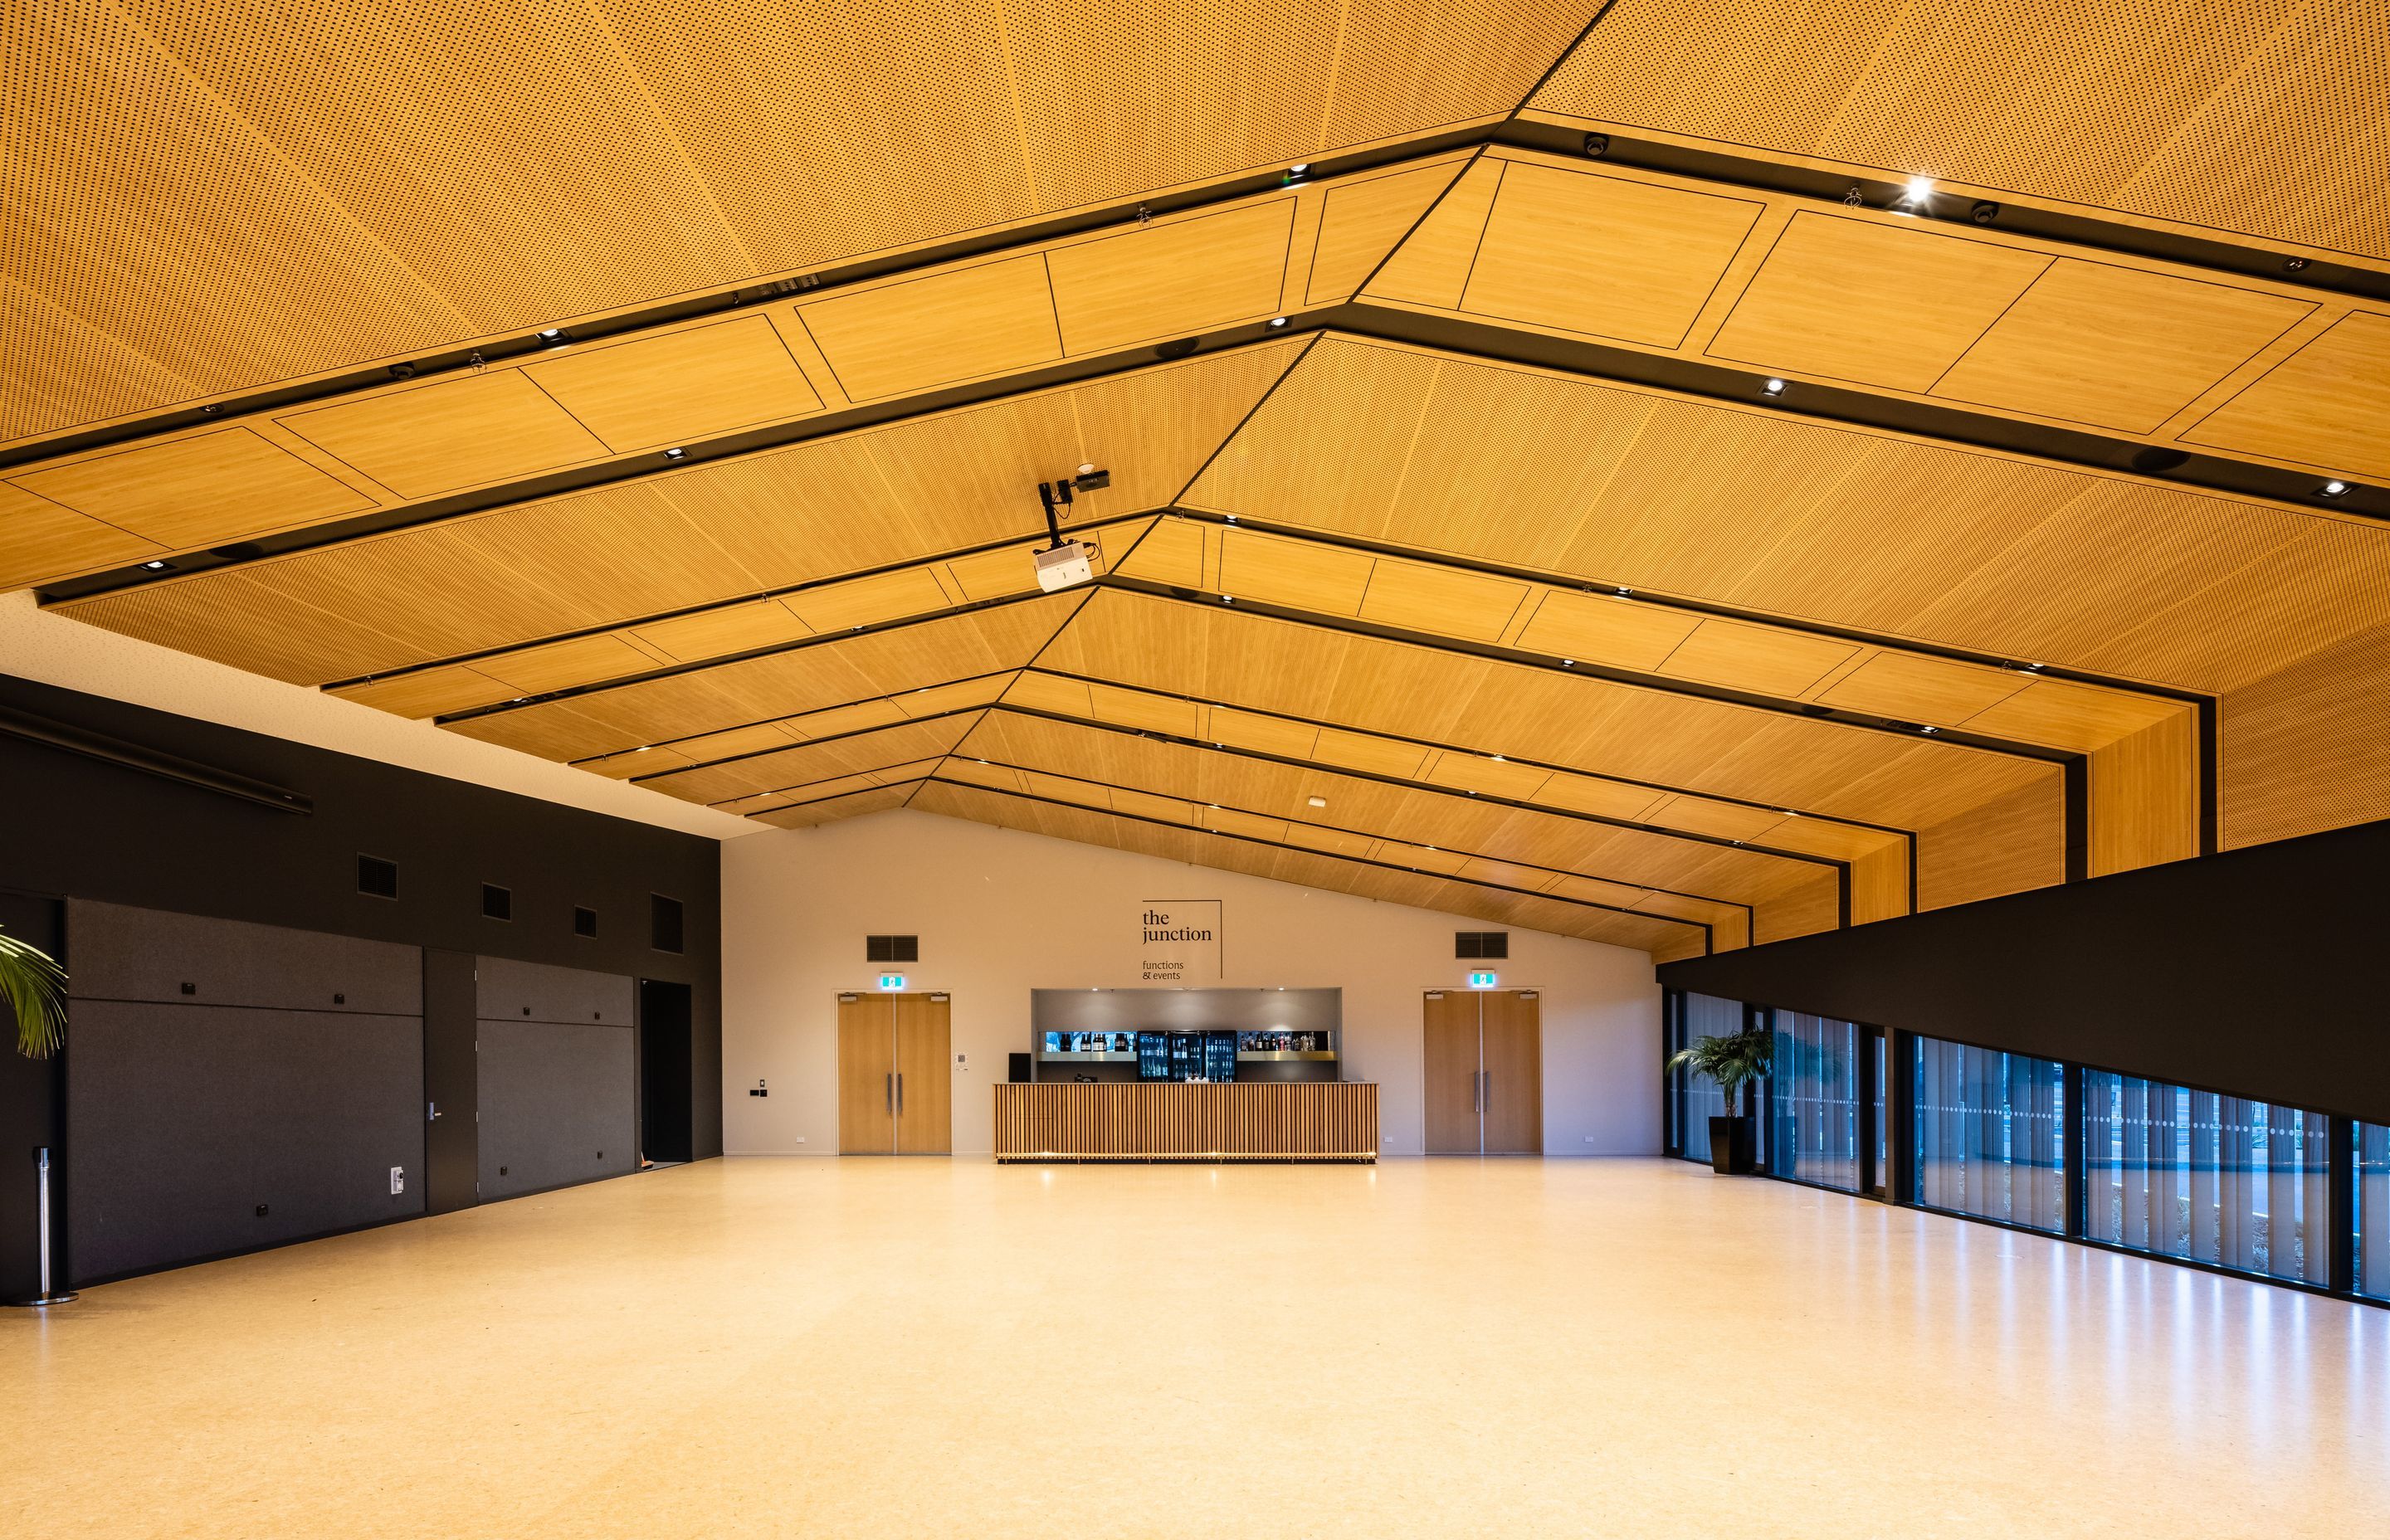 A two-way suspended ceilings provides acoustic properties and aesthetics, as well as concealing services for ease of access. Photography by Clinton Lloyd.